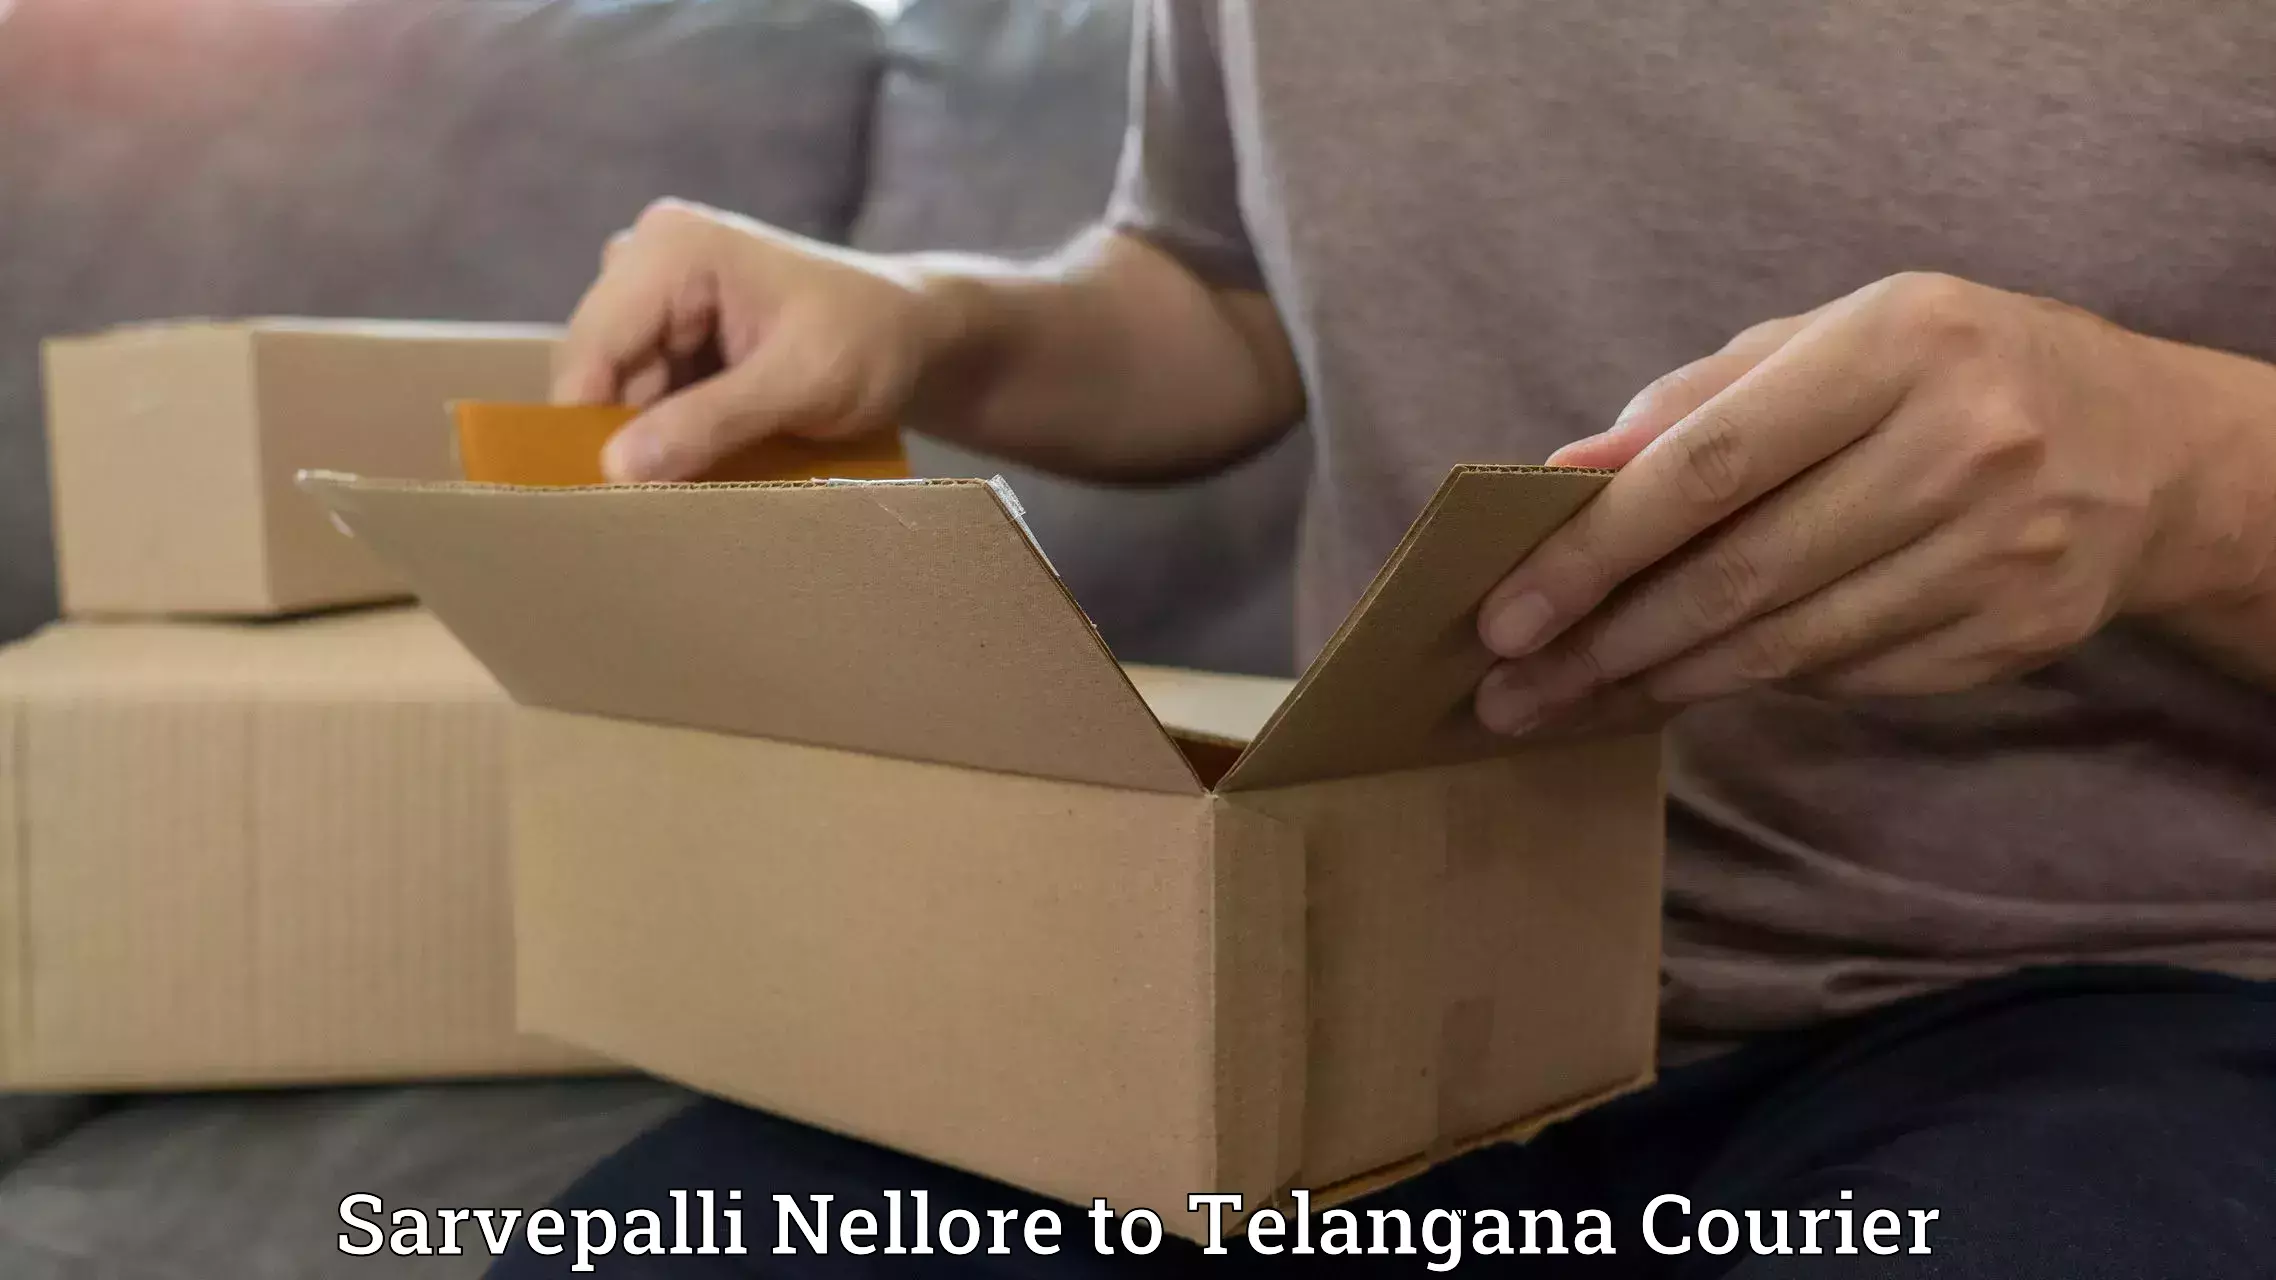 Secure package delivery Sarvepalli Nellore to Yerrupalem